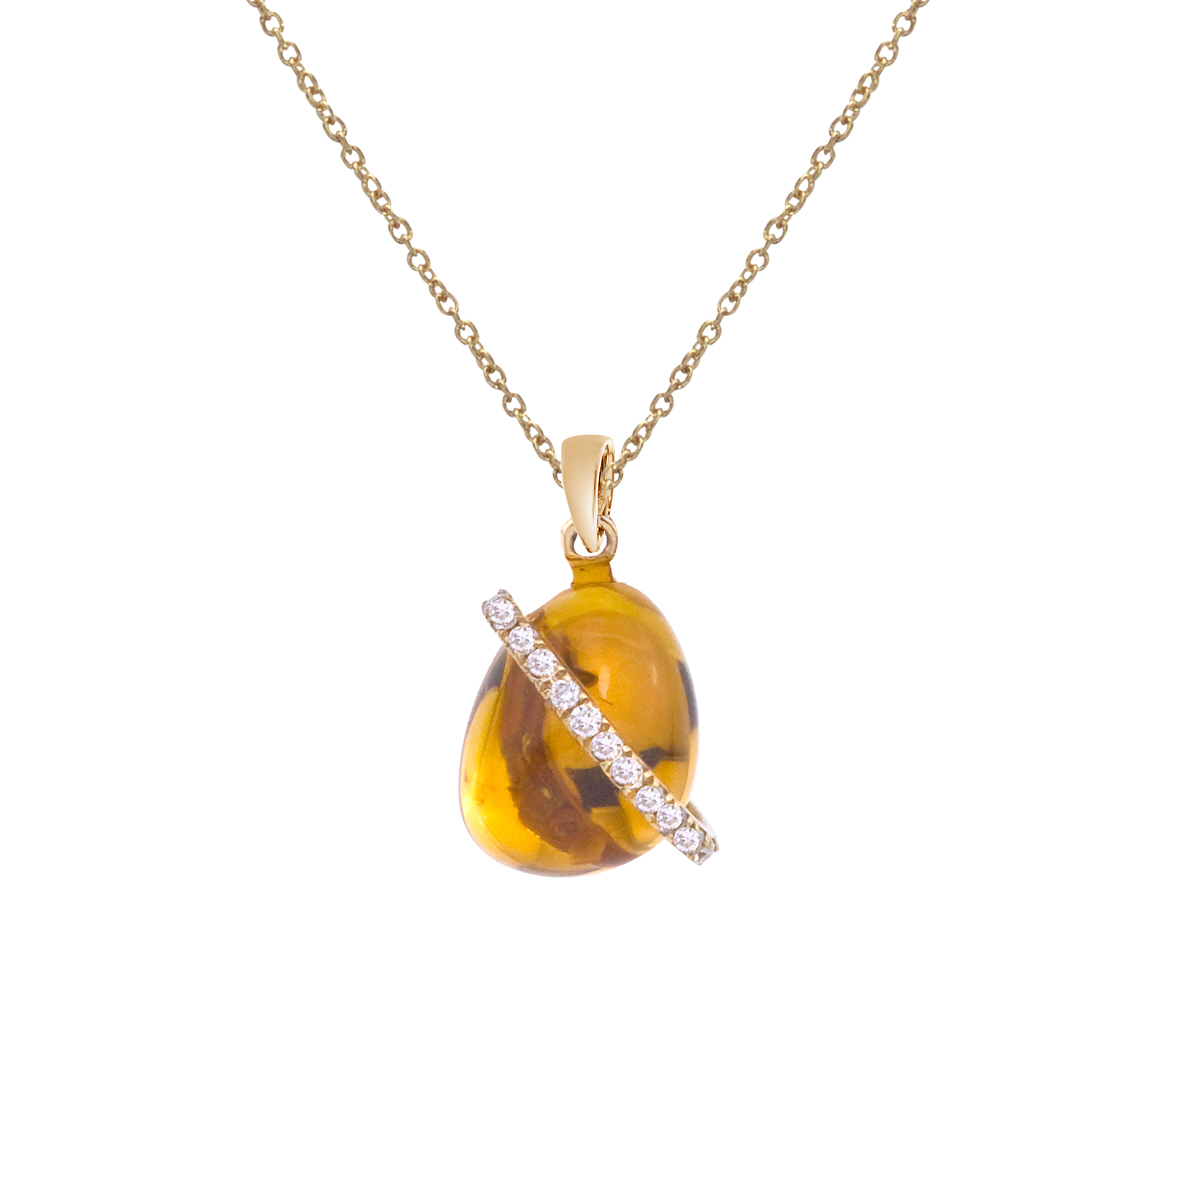 A luminous 9x7 mm cabochon citrine pendant with a ring of bright diamonds set in 14k yellow gold.